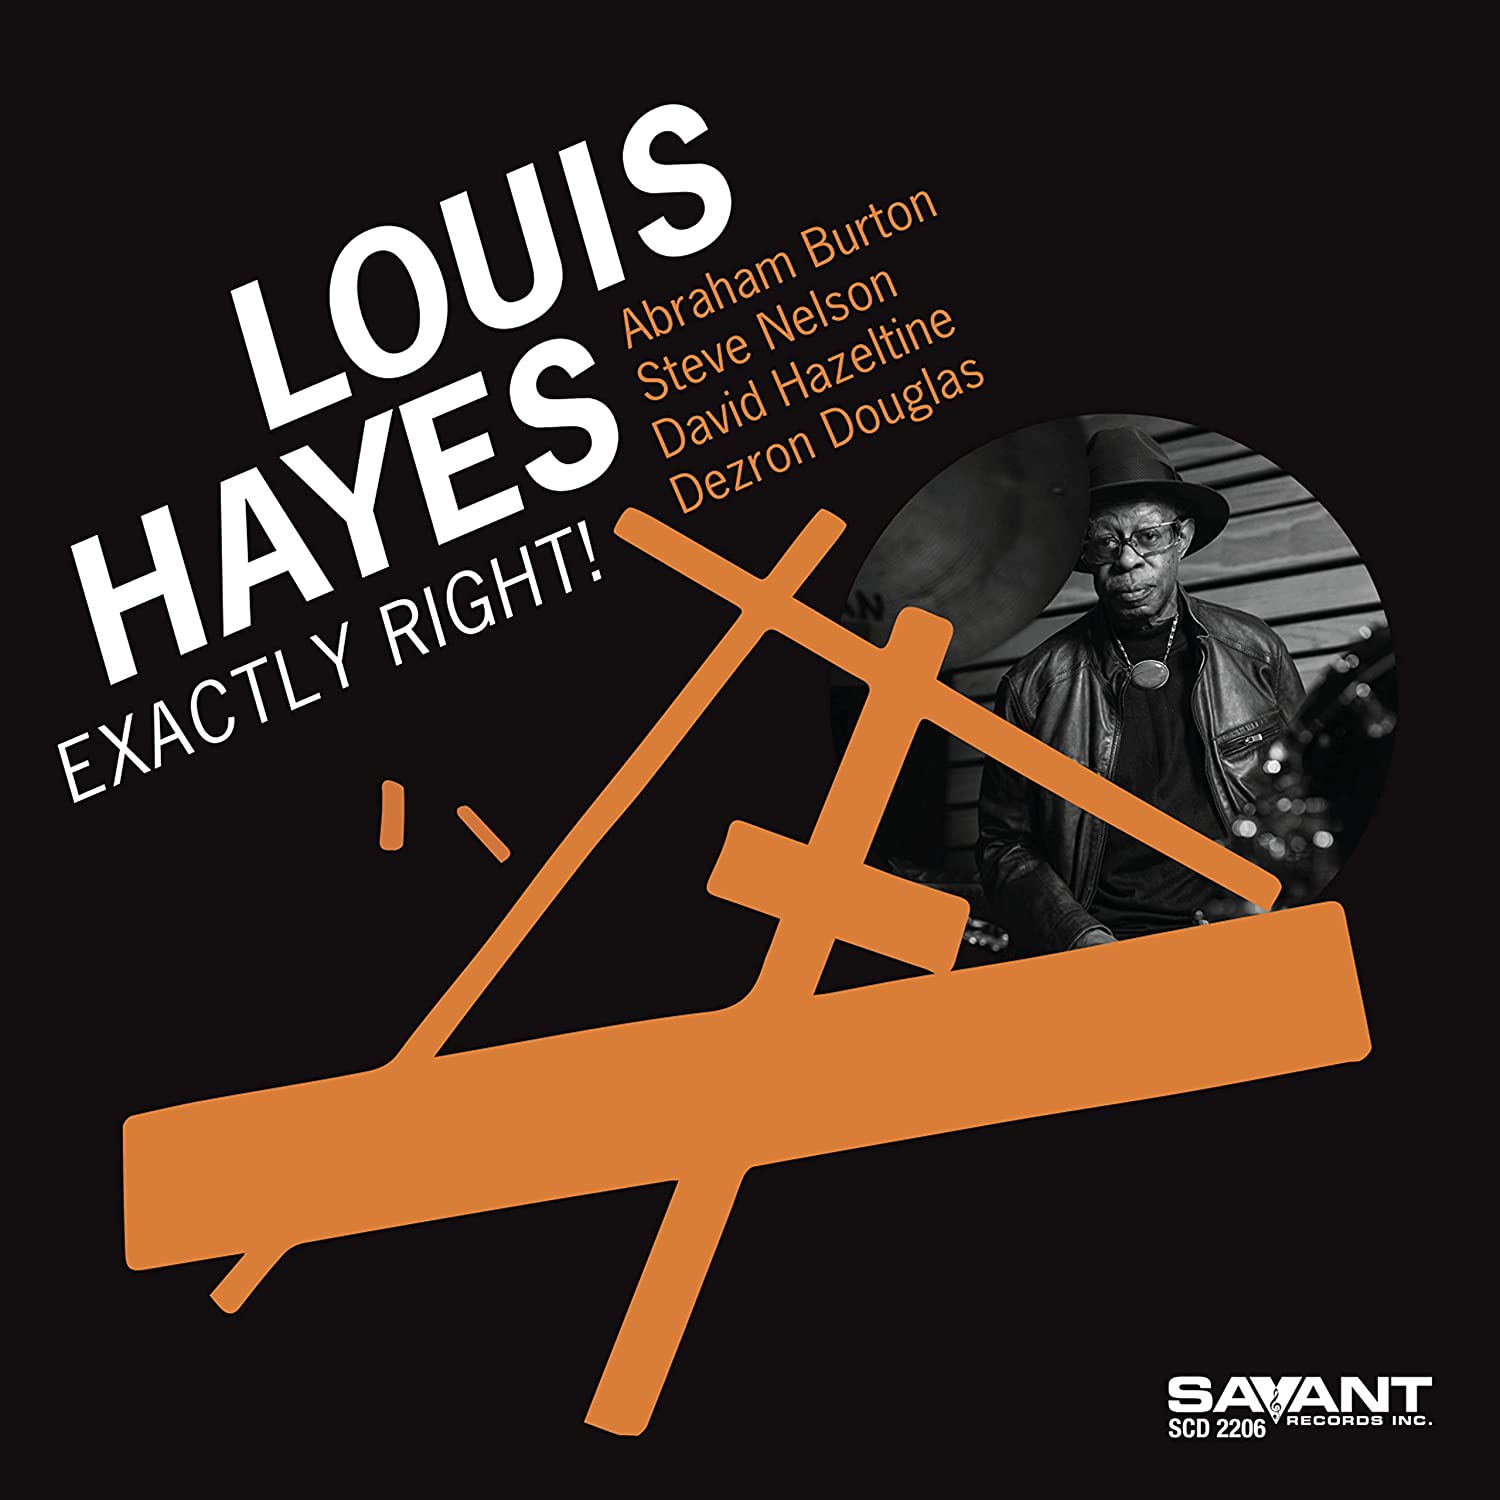 LOUIS HAYES - Exactly Right! cover 